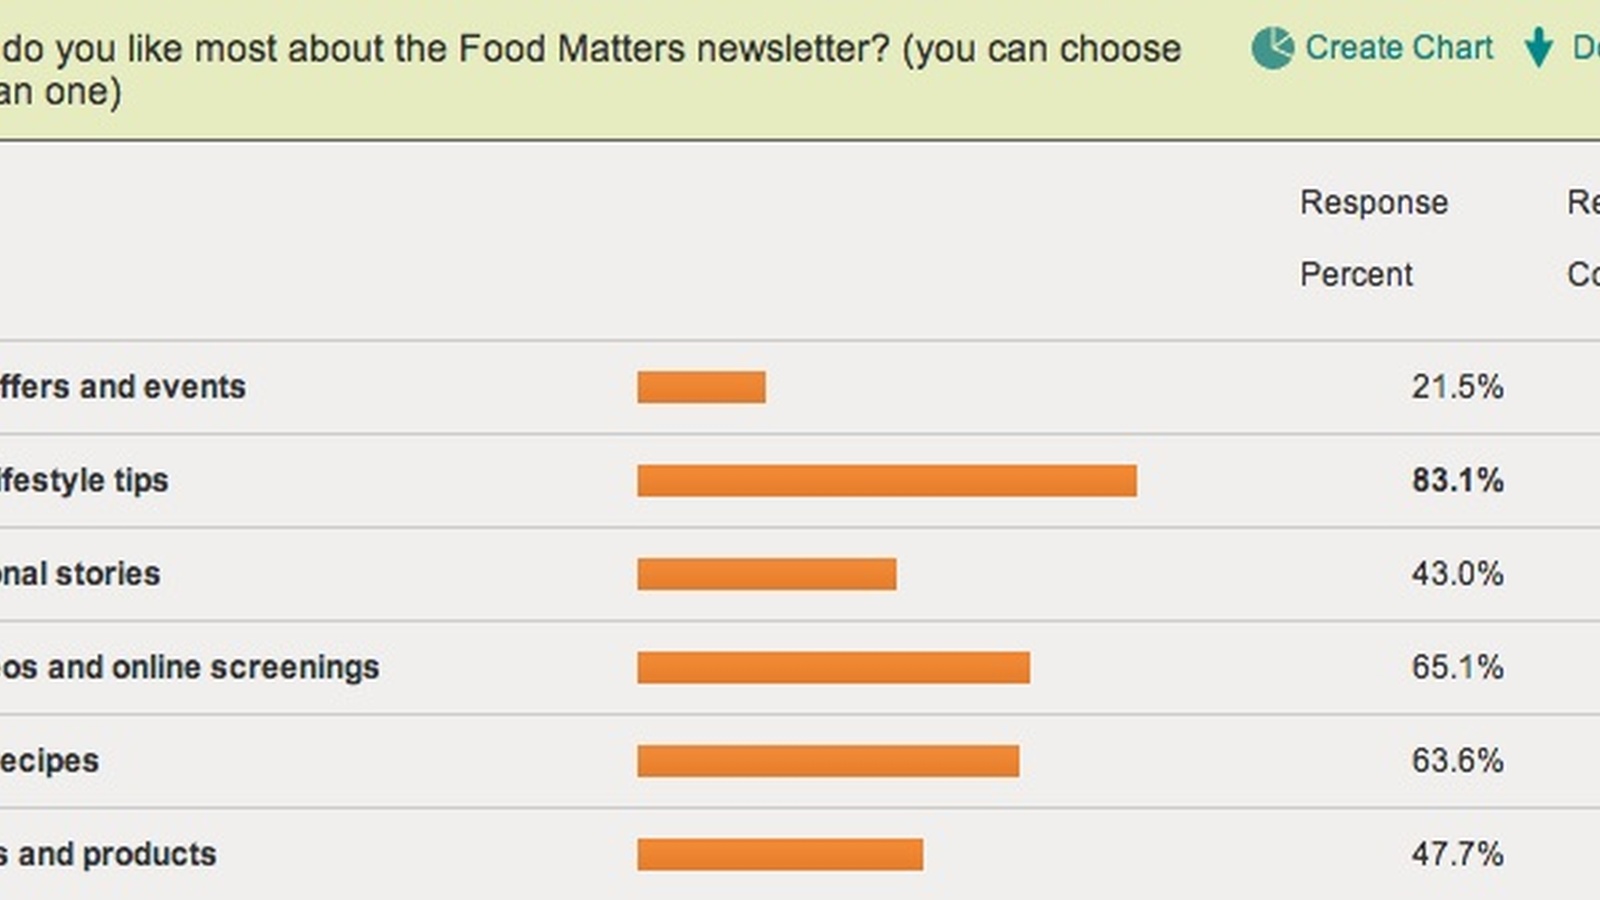 You Spoke, We Listened! (2012 Food Matters Survey Results)